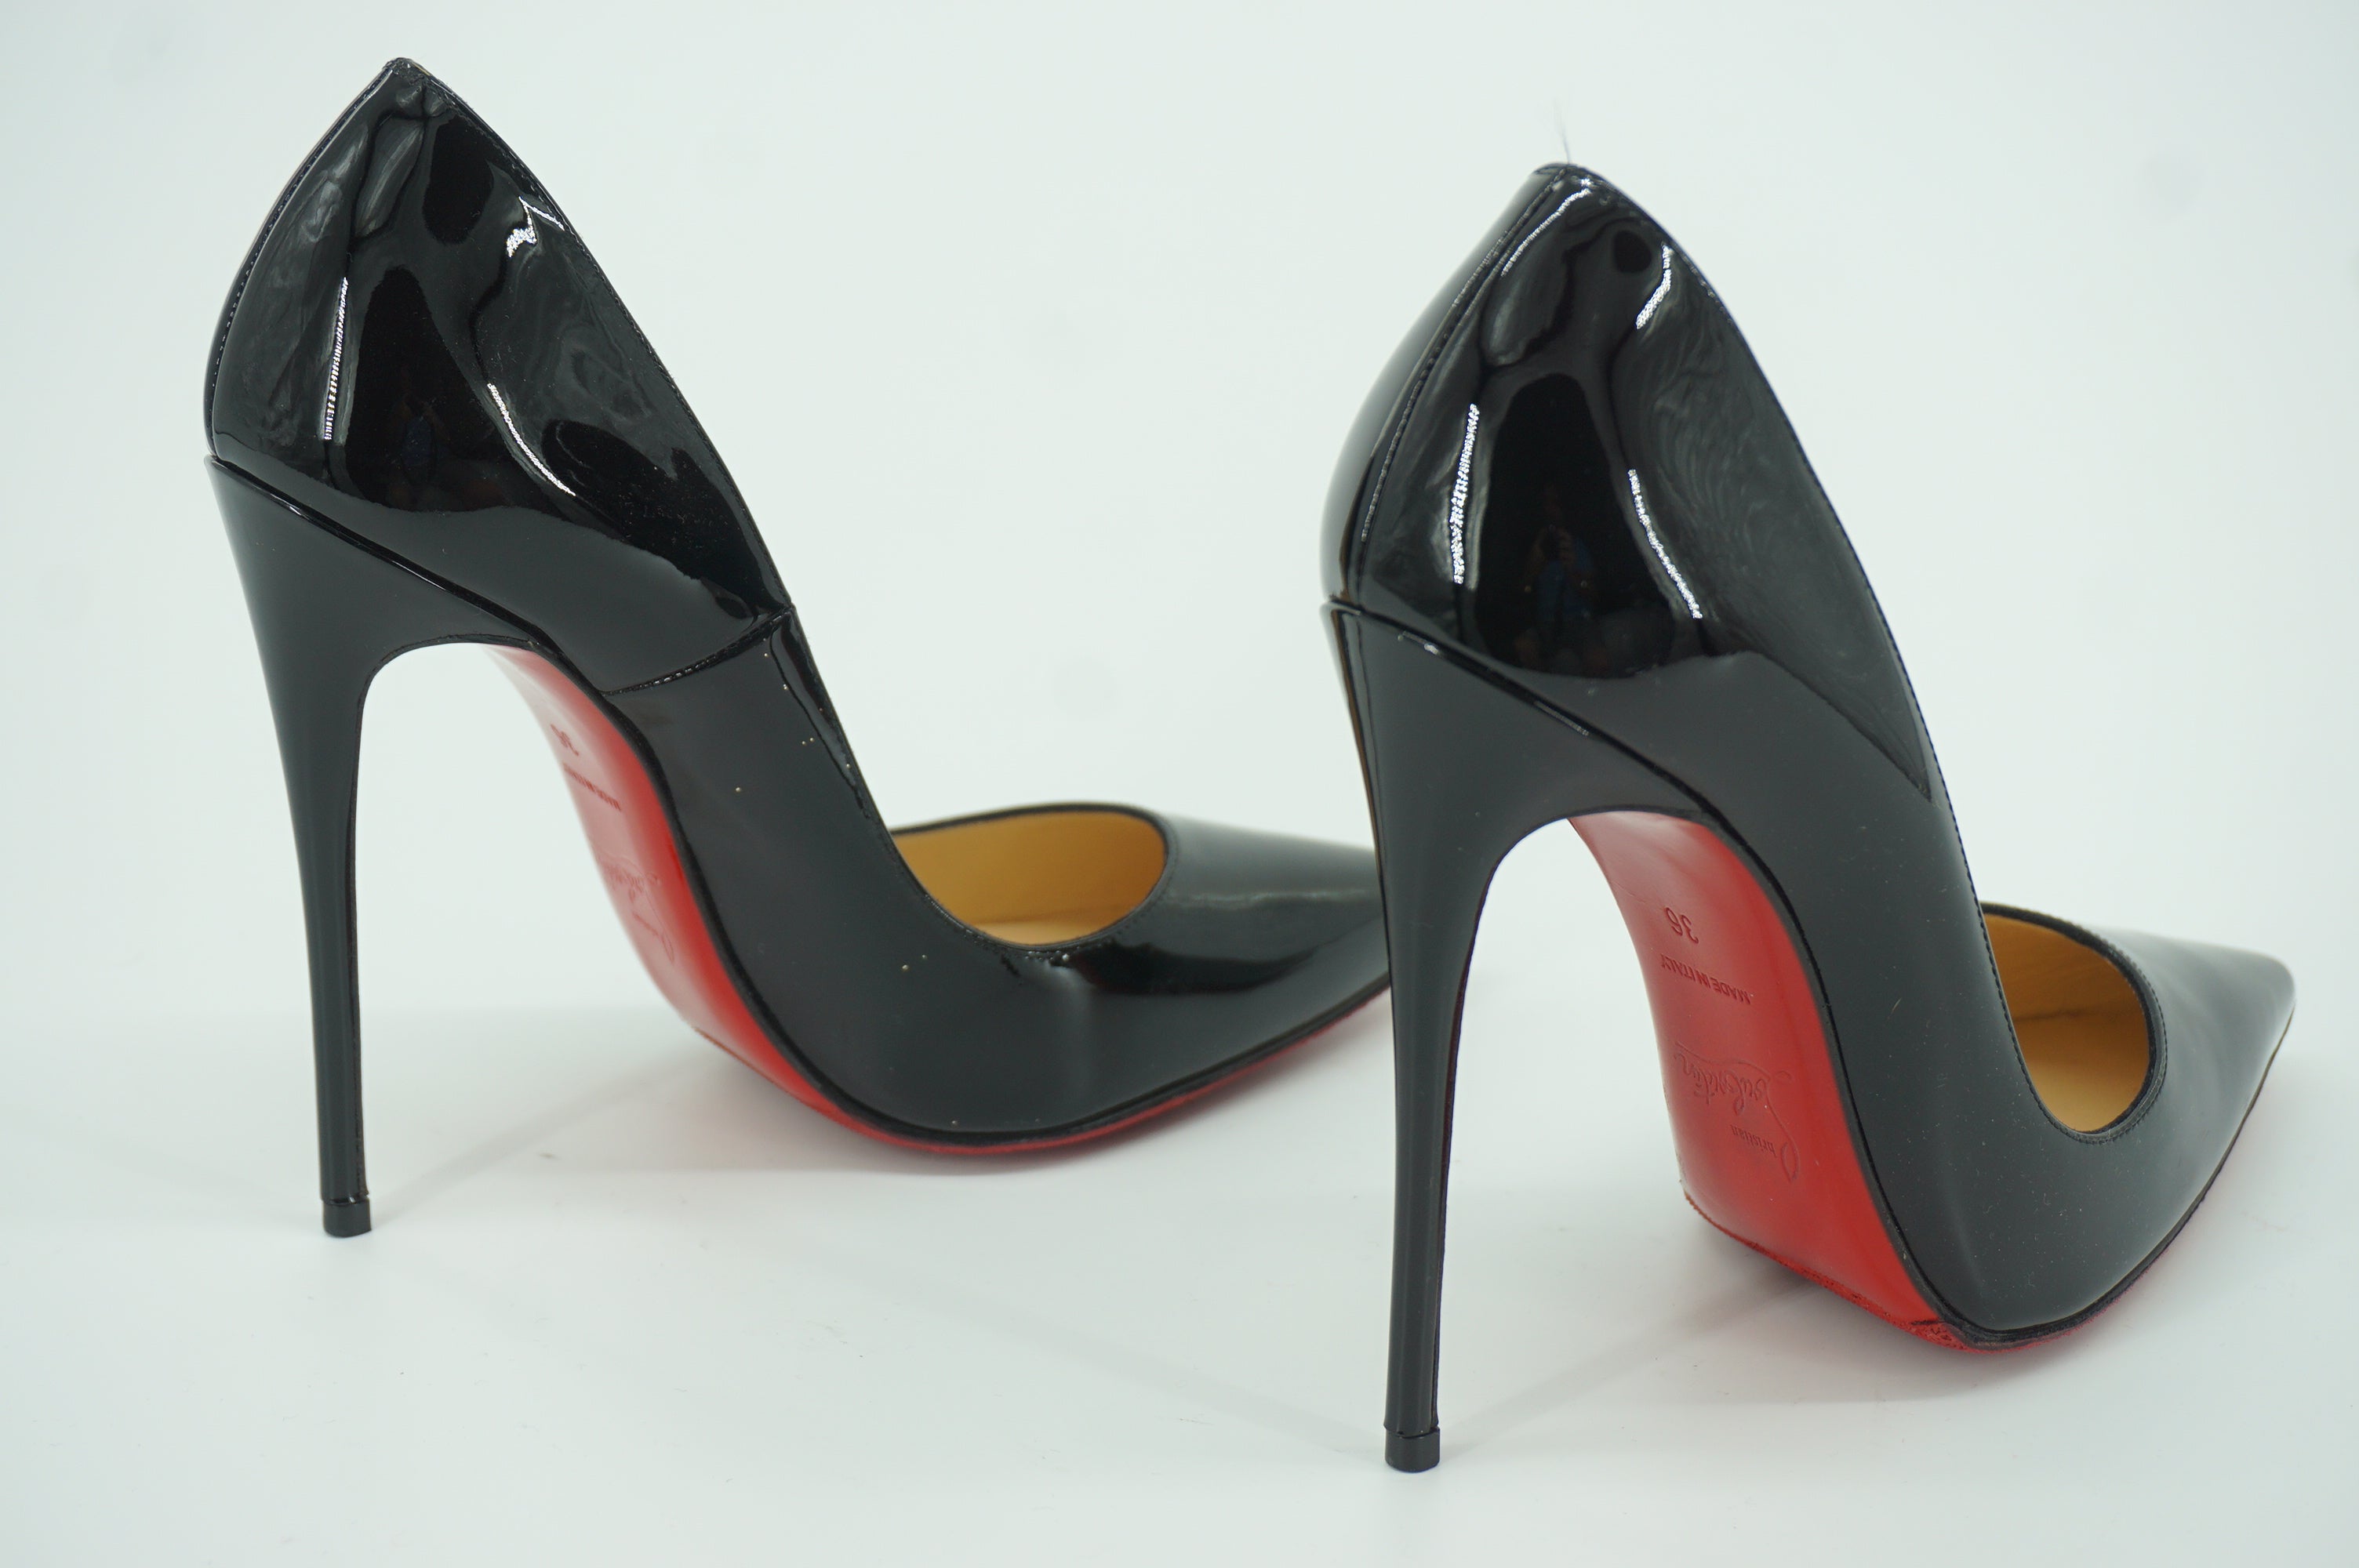 Christian Louboutin So Kate Pointy Pumps Black Patent Size 5 Womens Classic